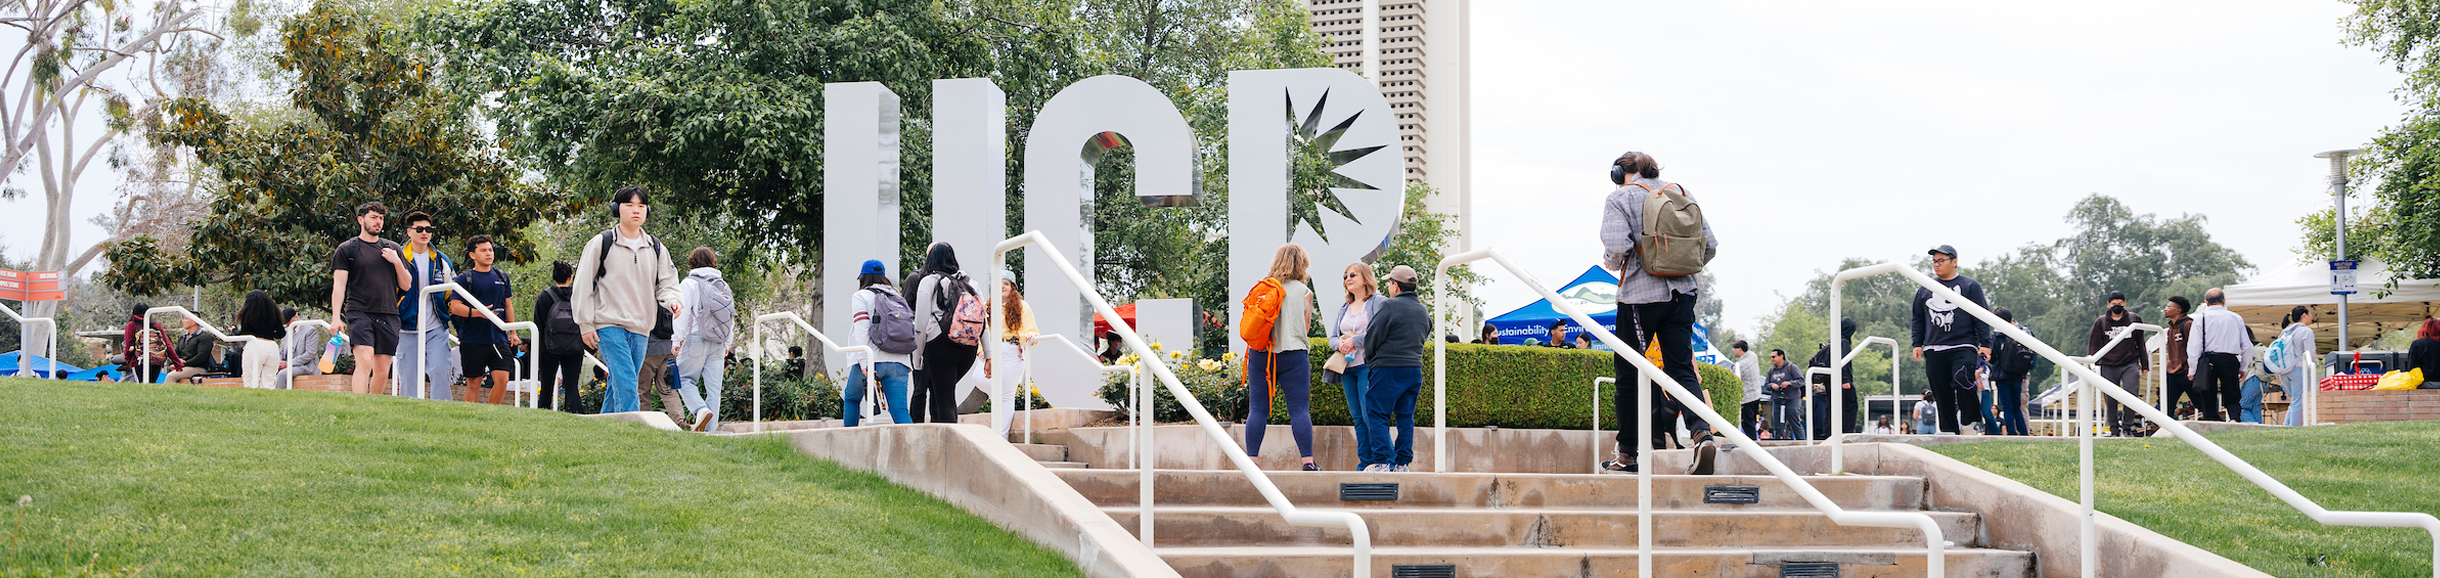 A view of the UCR letter sculpture on the UC Riverside campus. Students walk in front of the sculpture.